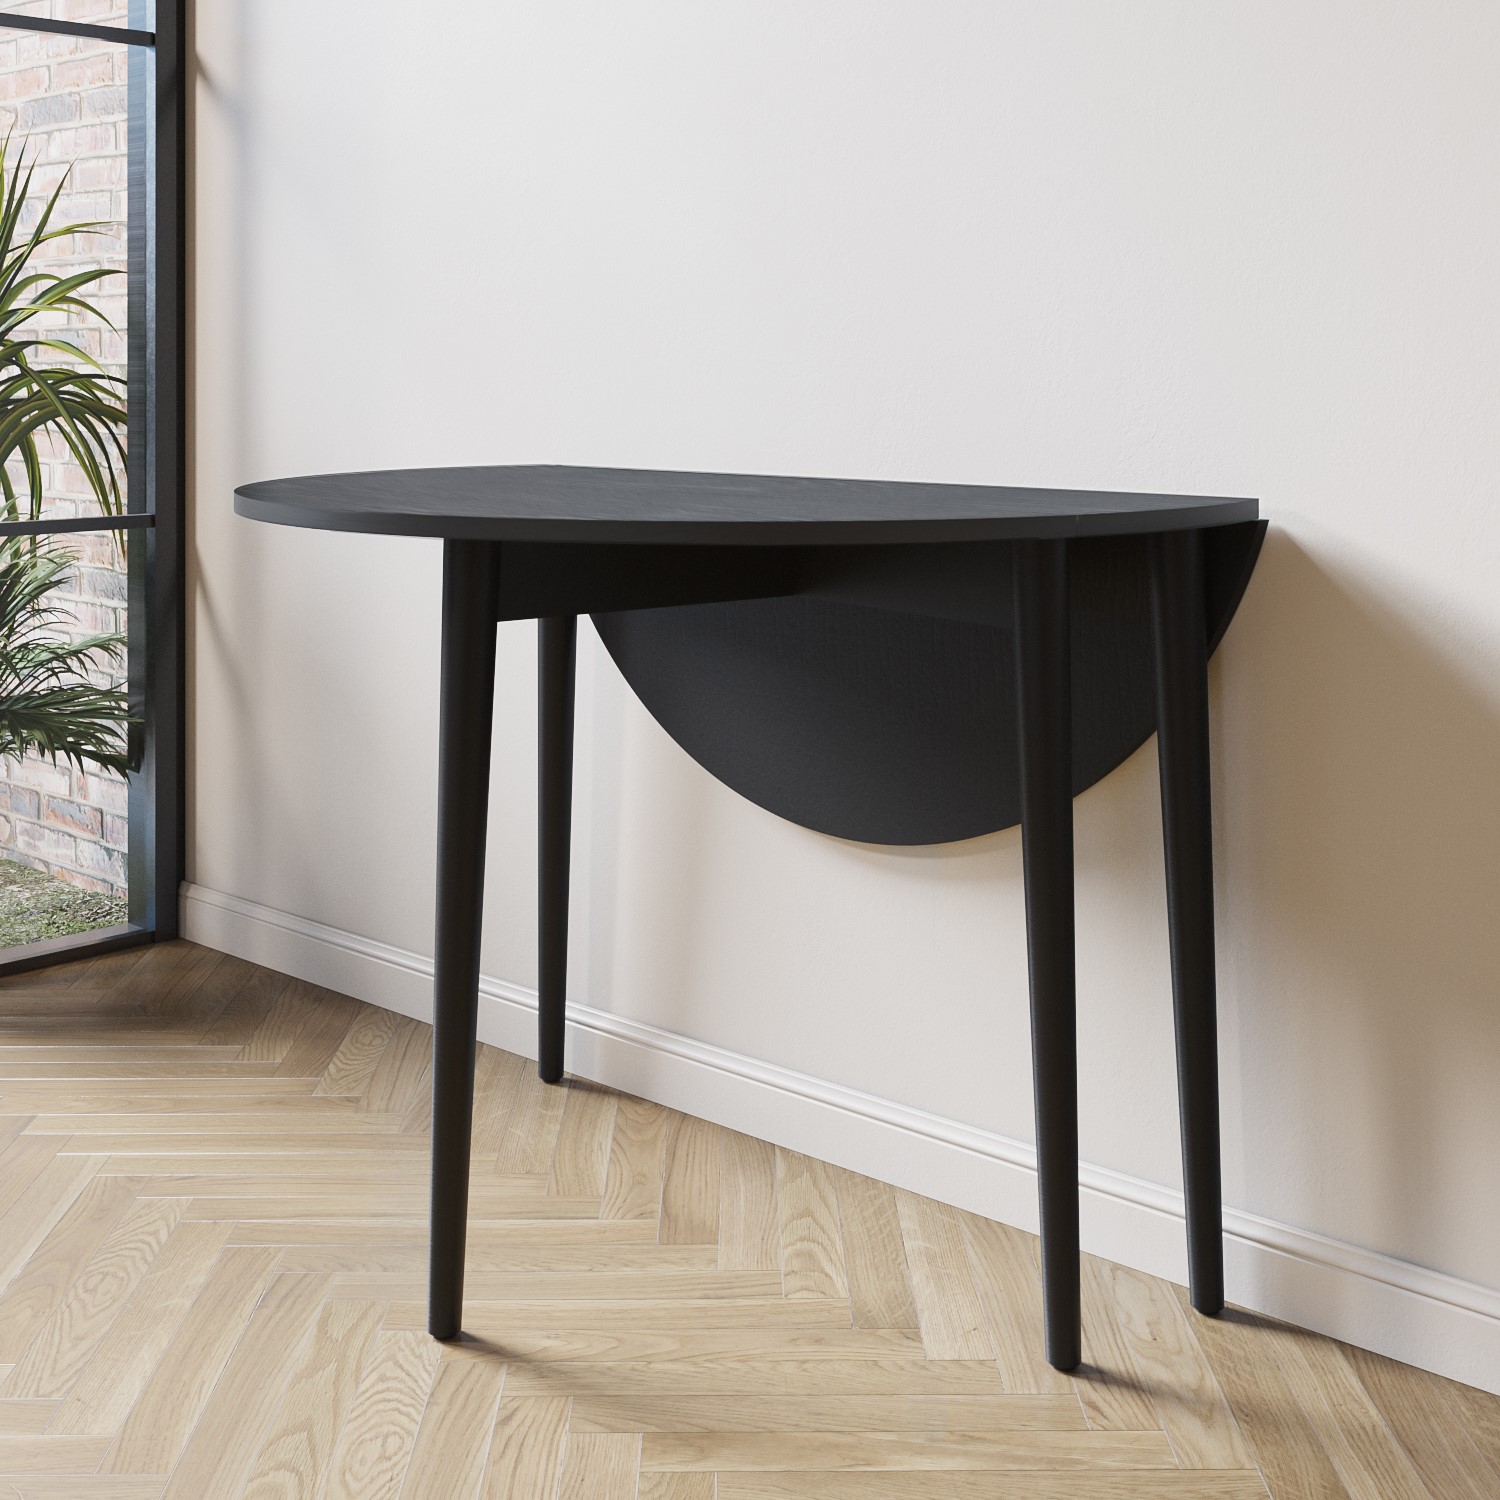 Photo of Small round black folding drop leaf dining table - seats 2-4 - rudy